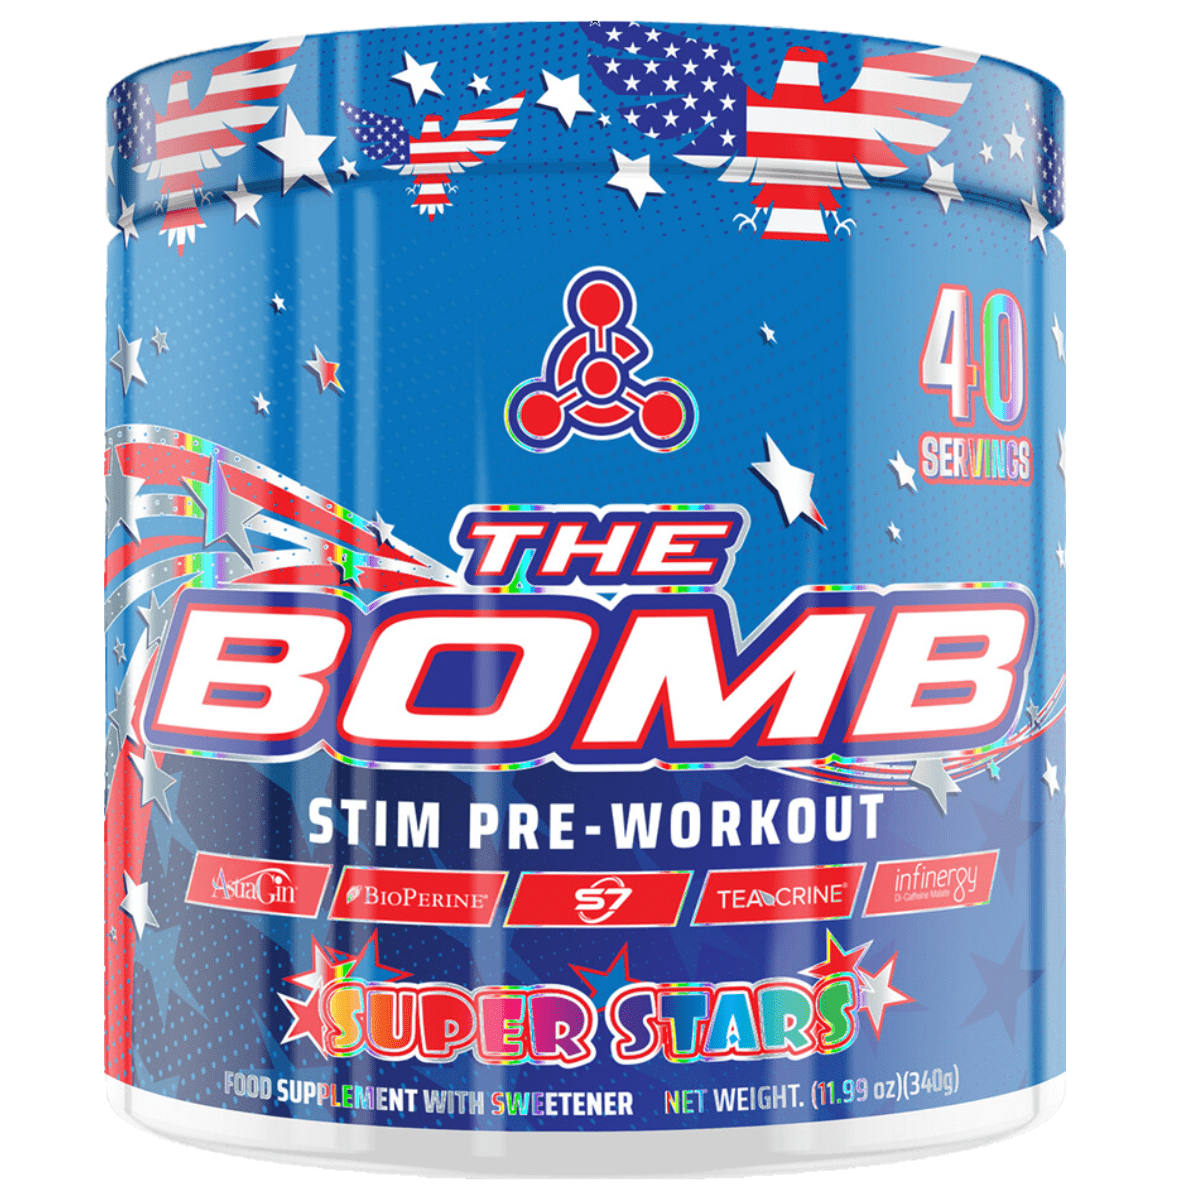 CW THE BOMB™ PRE-WORKOUT